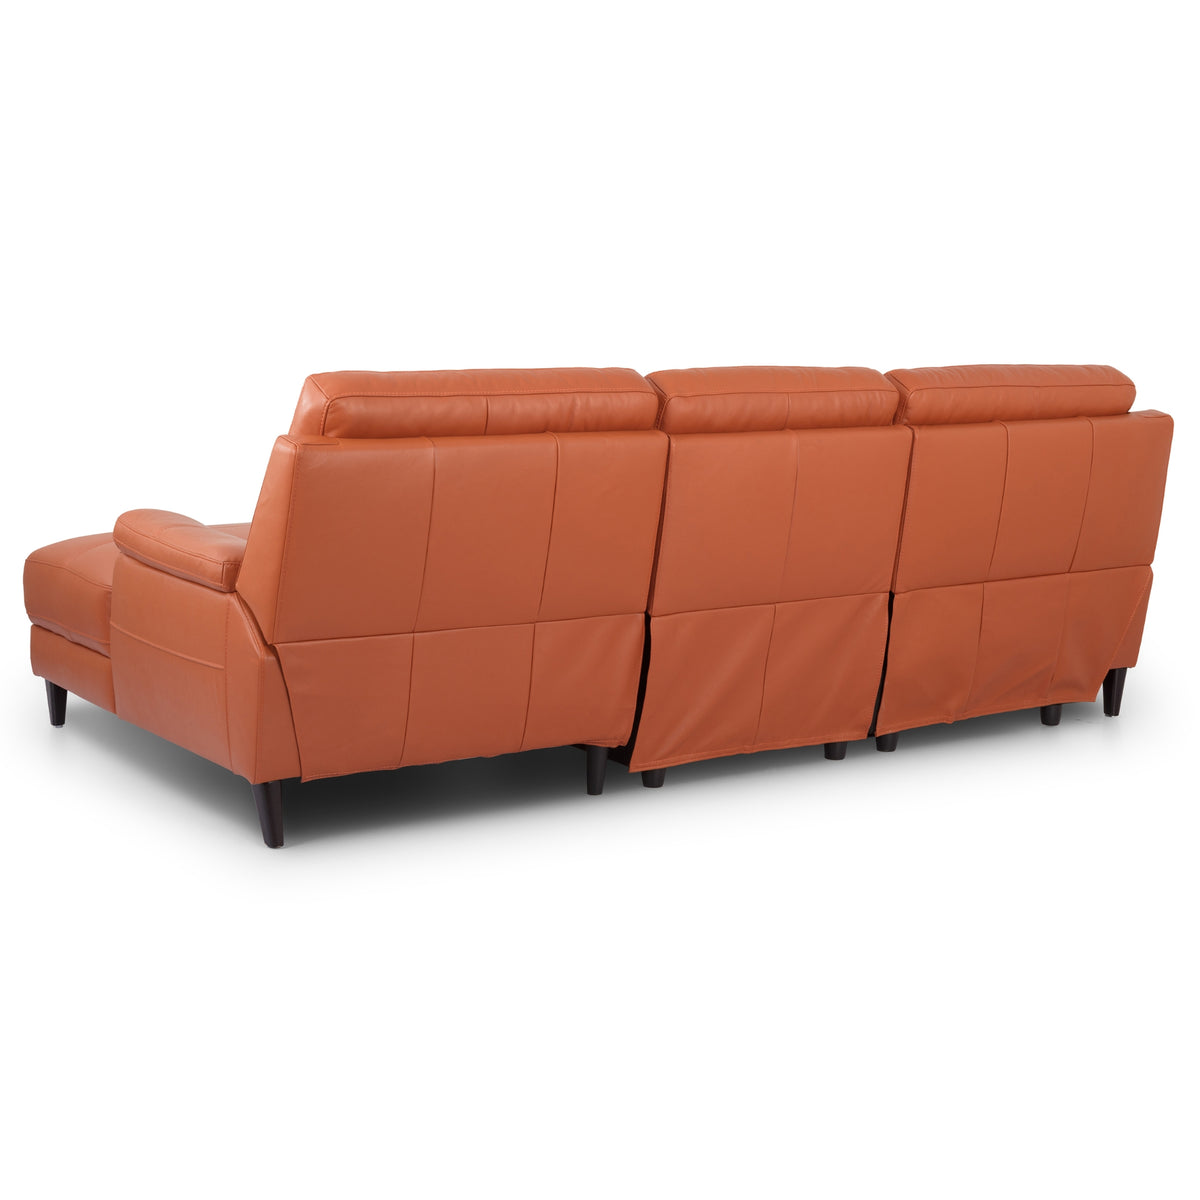 Ella 3 Seater Leather Electric Recliner Chaise Sofa Right 